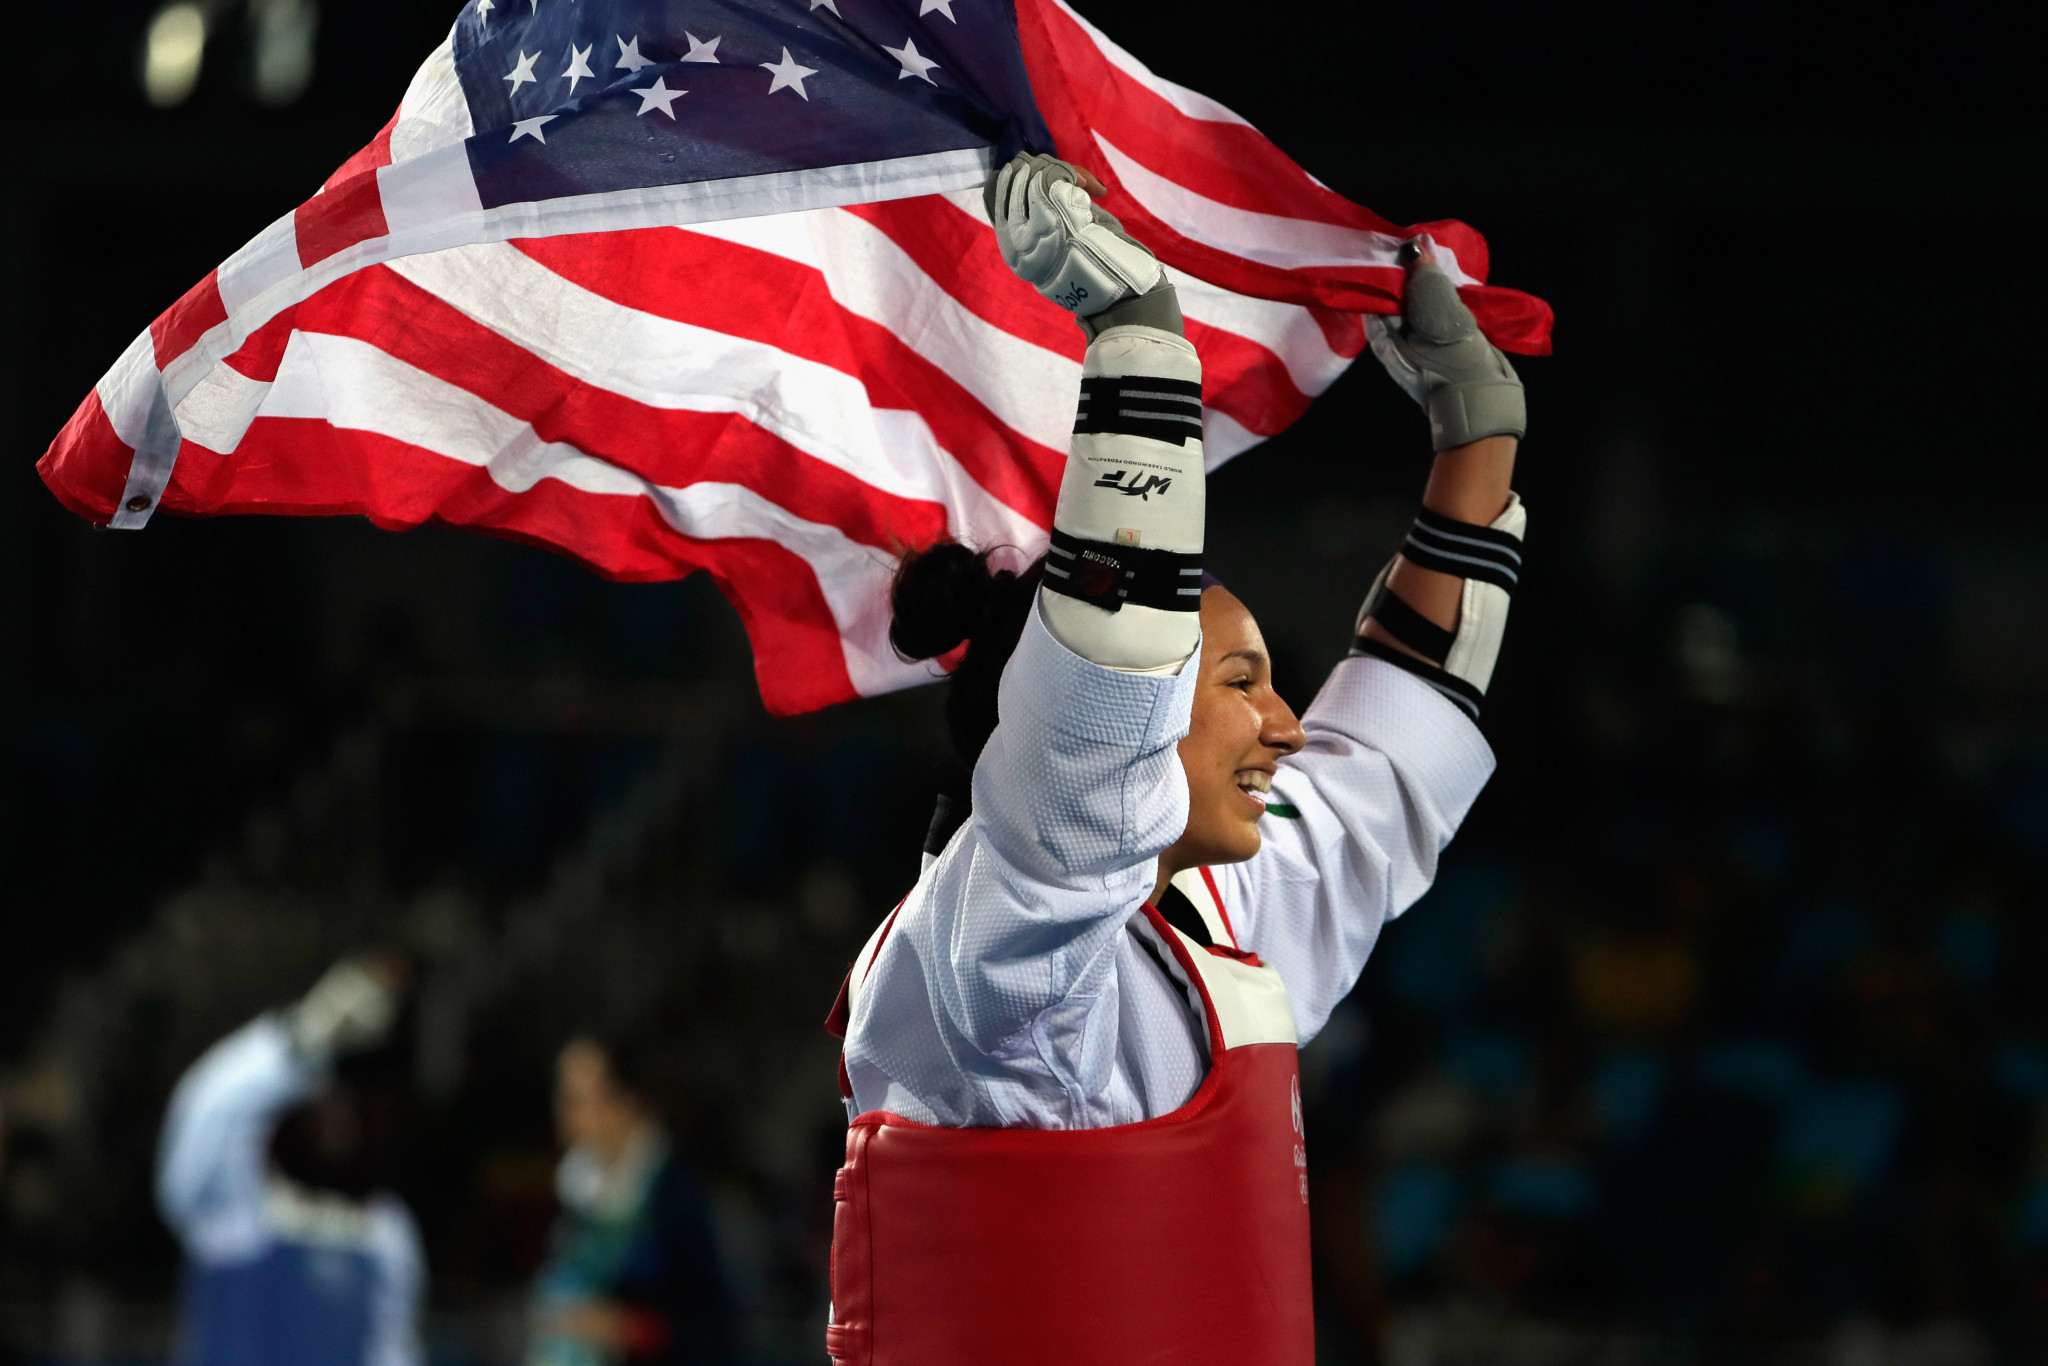 Jackie Galloway was the United States' lone Olympic taekwondo medallist at Rio 2016 ©Getty Images